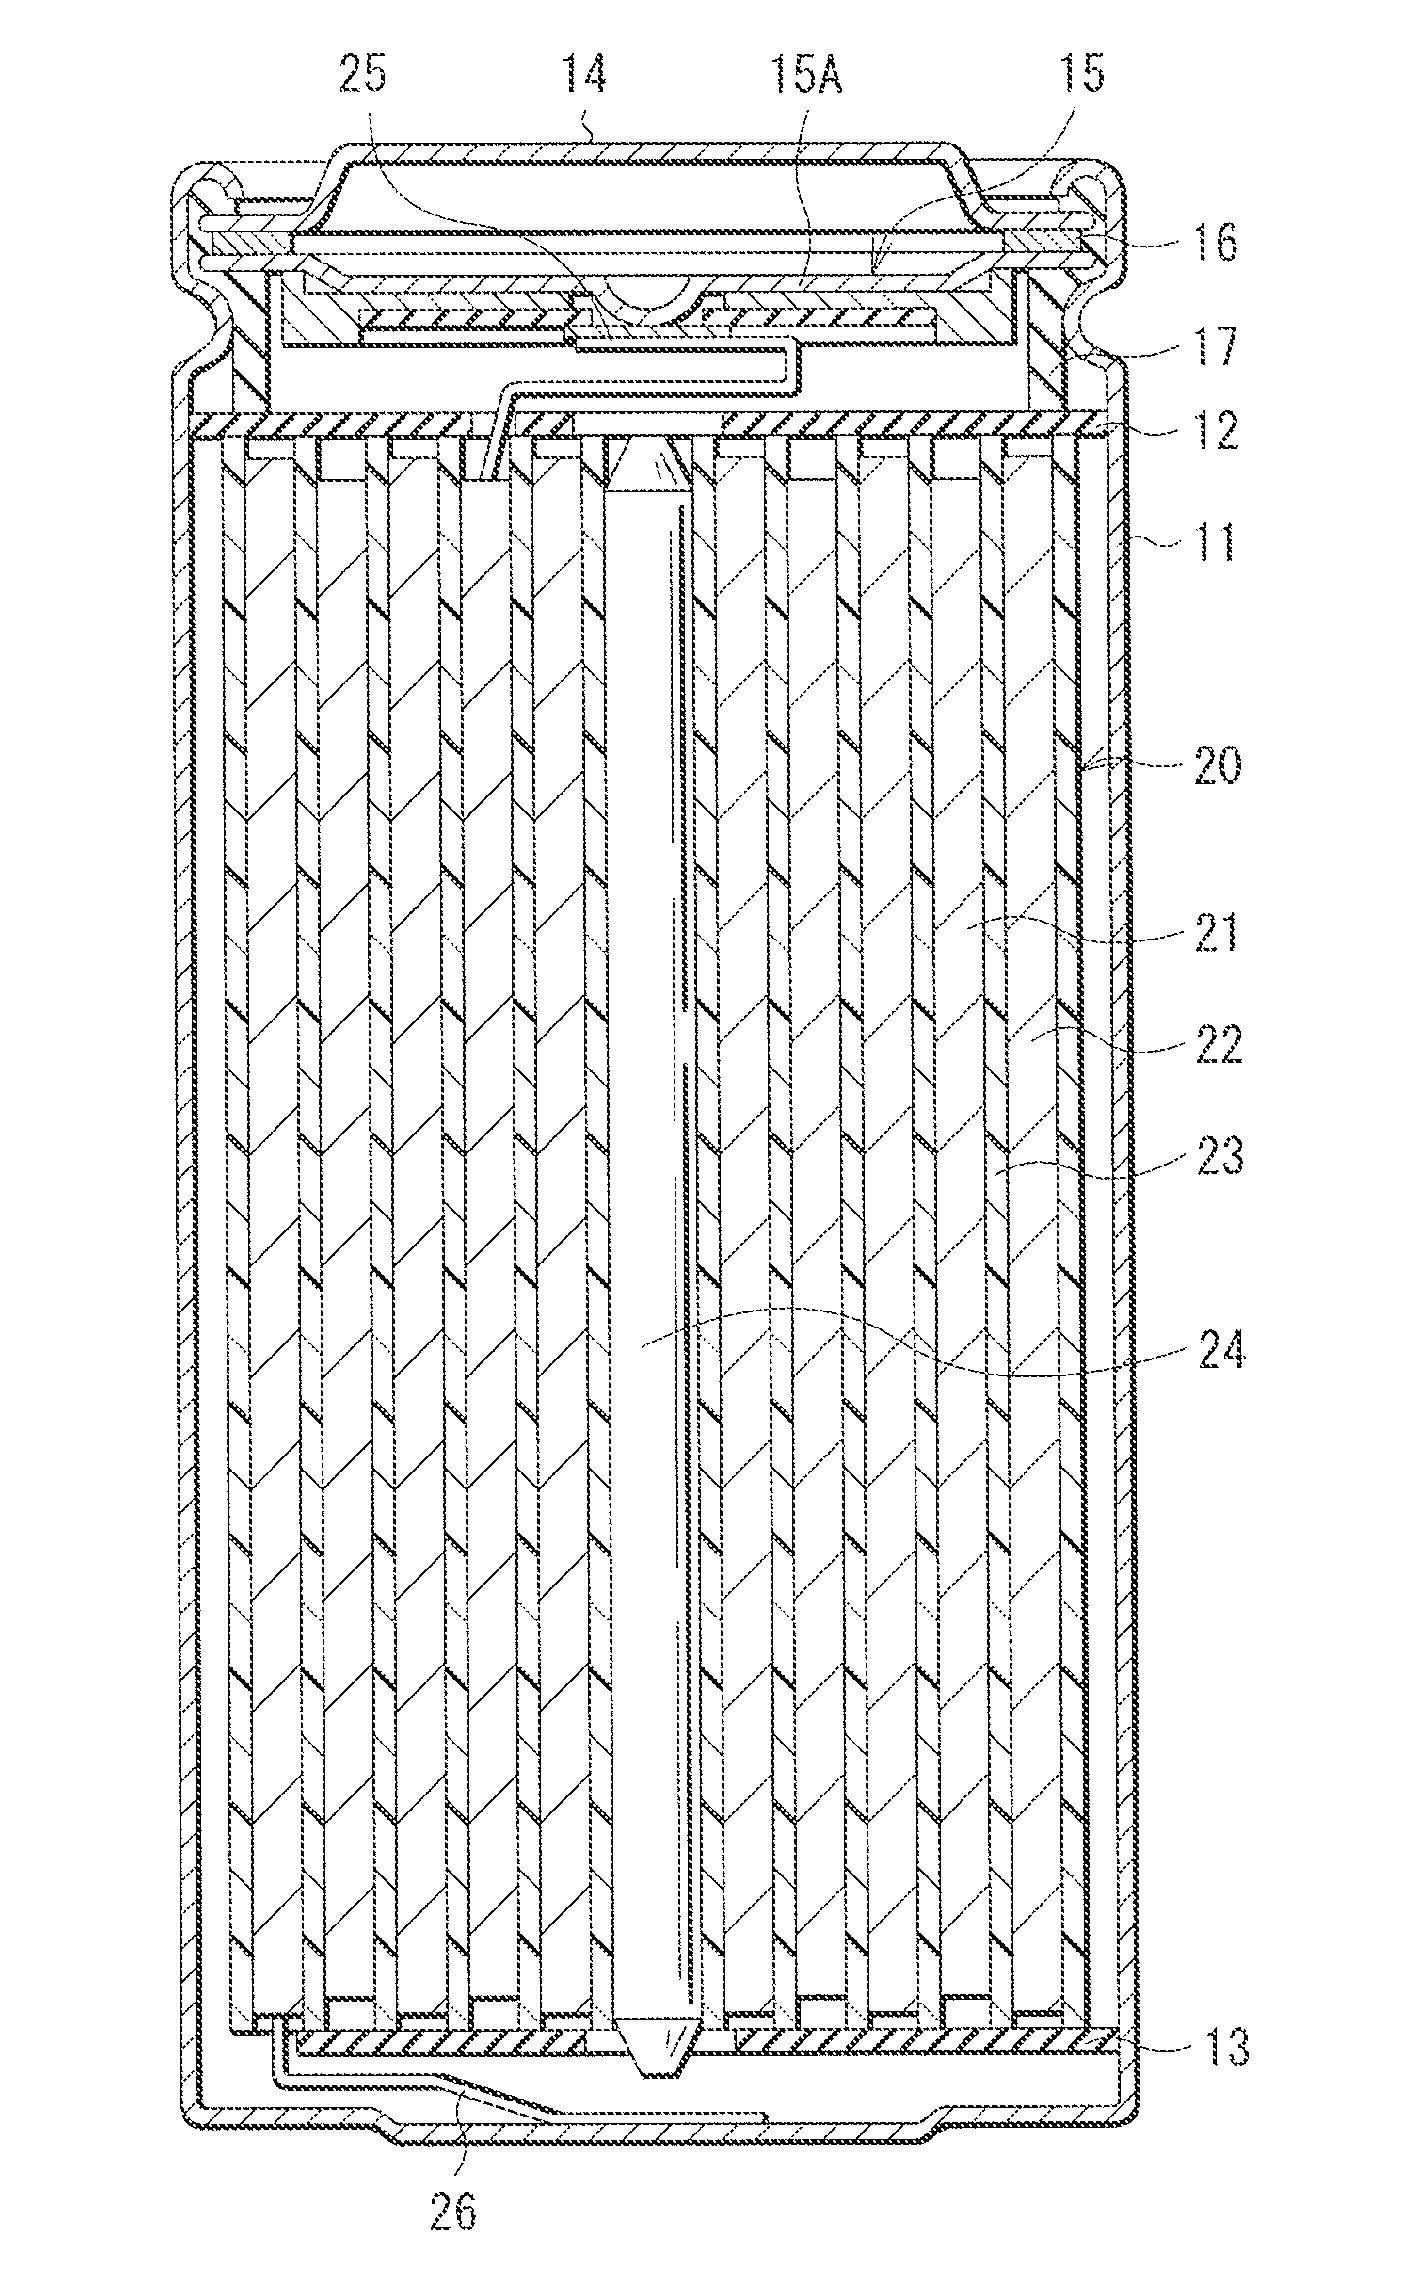 Secondary battery-use anode, secondary battery, battery pack, electric vehicle, electri power storage system, electric power tool, and electronic apparatus